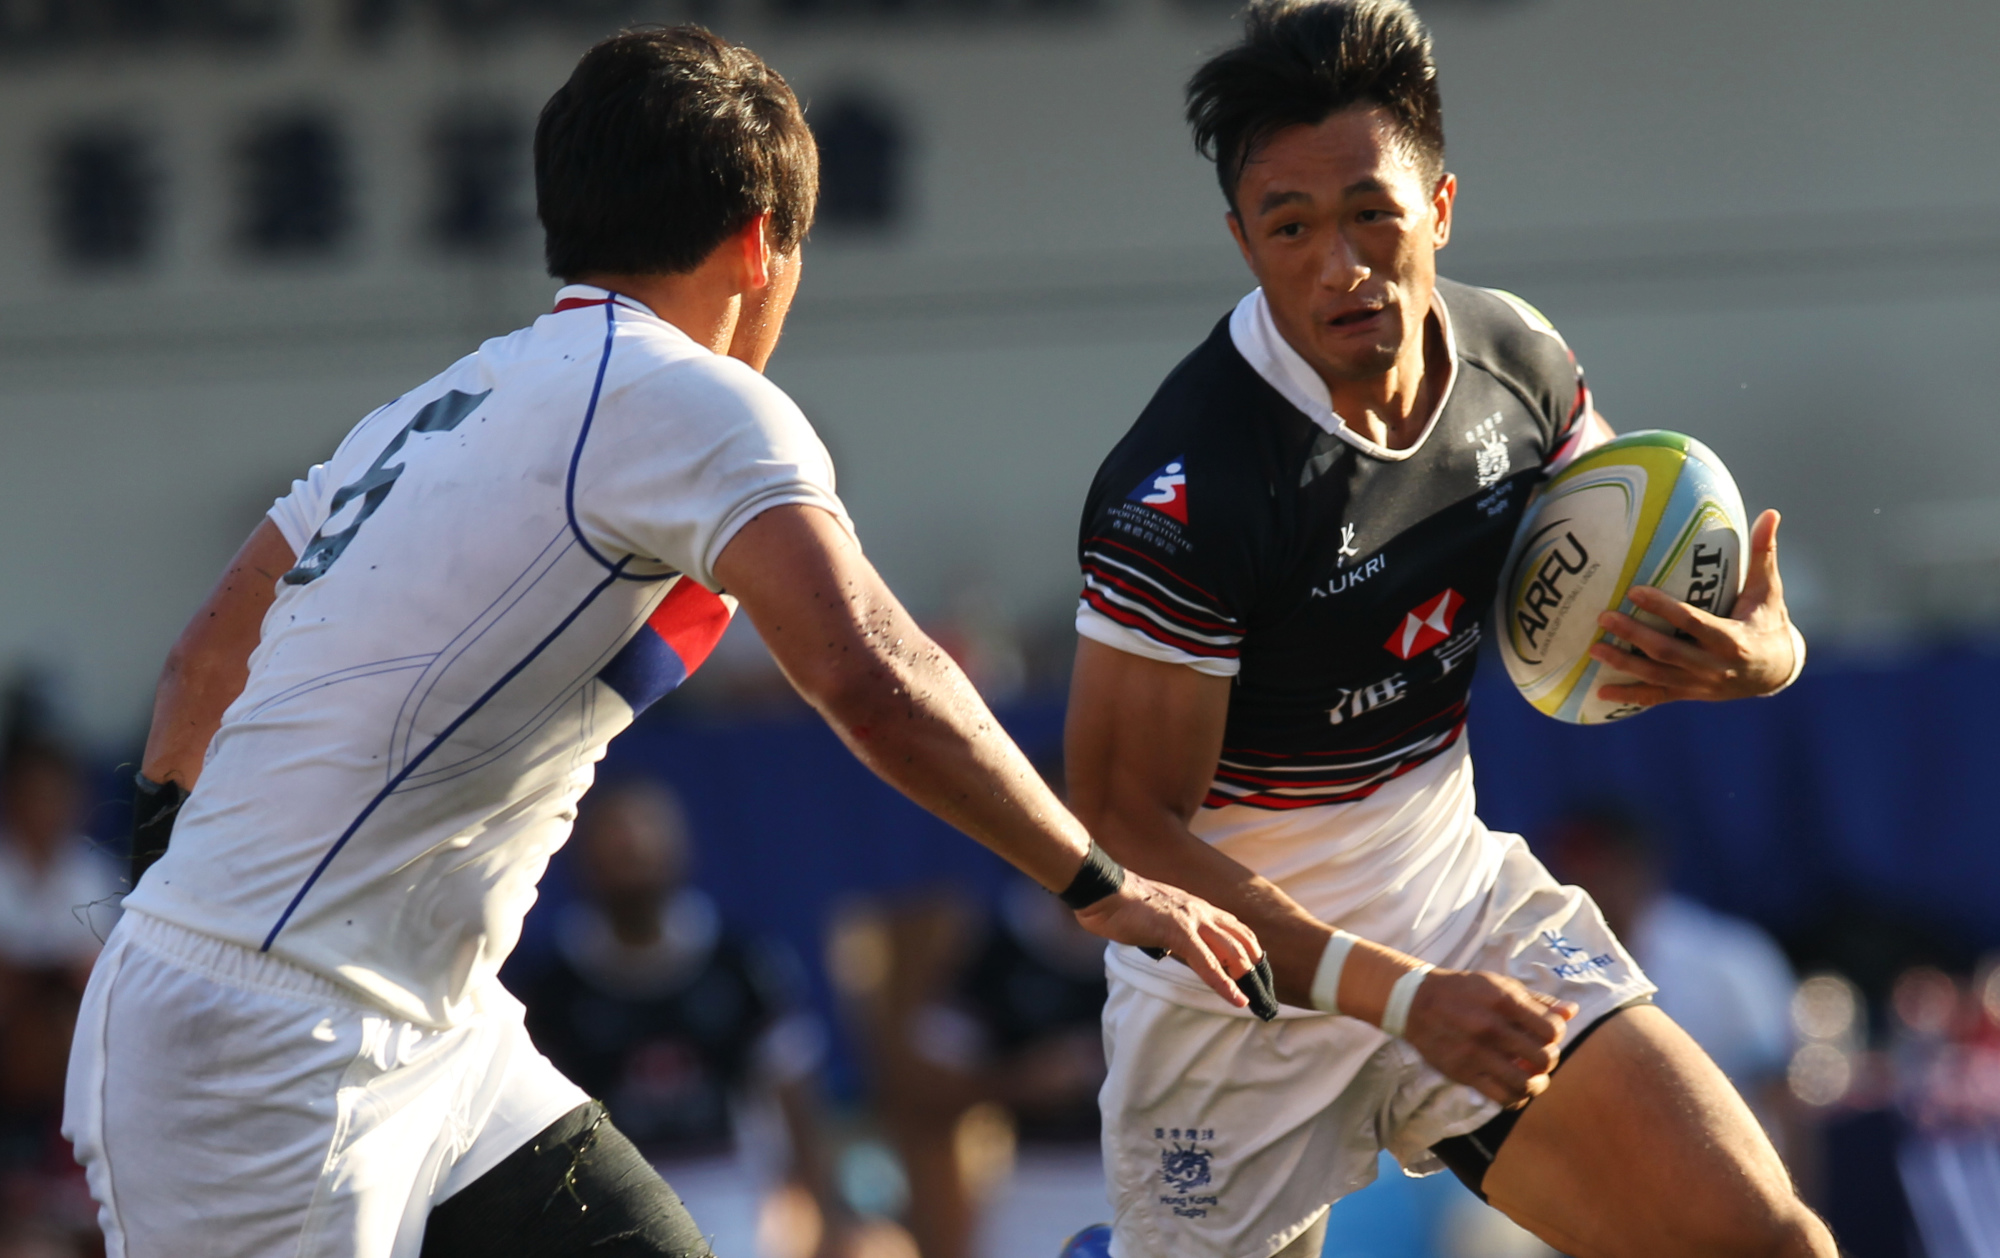 Winning big events like the Asian Games will encourage more Chinese locals like Salom Yiu Kam-shing to play rugby. Photos: Felix Wong/SCMP